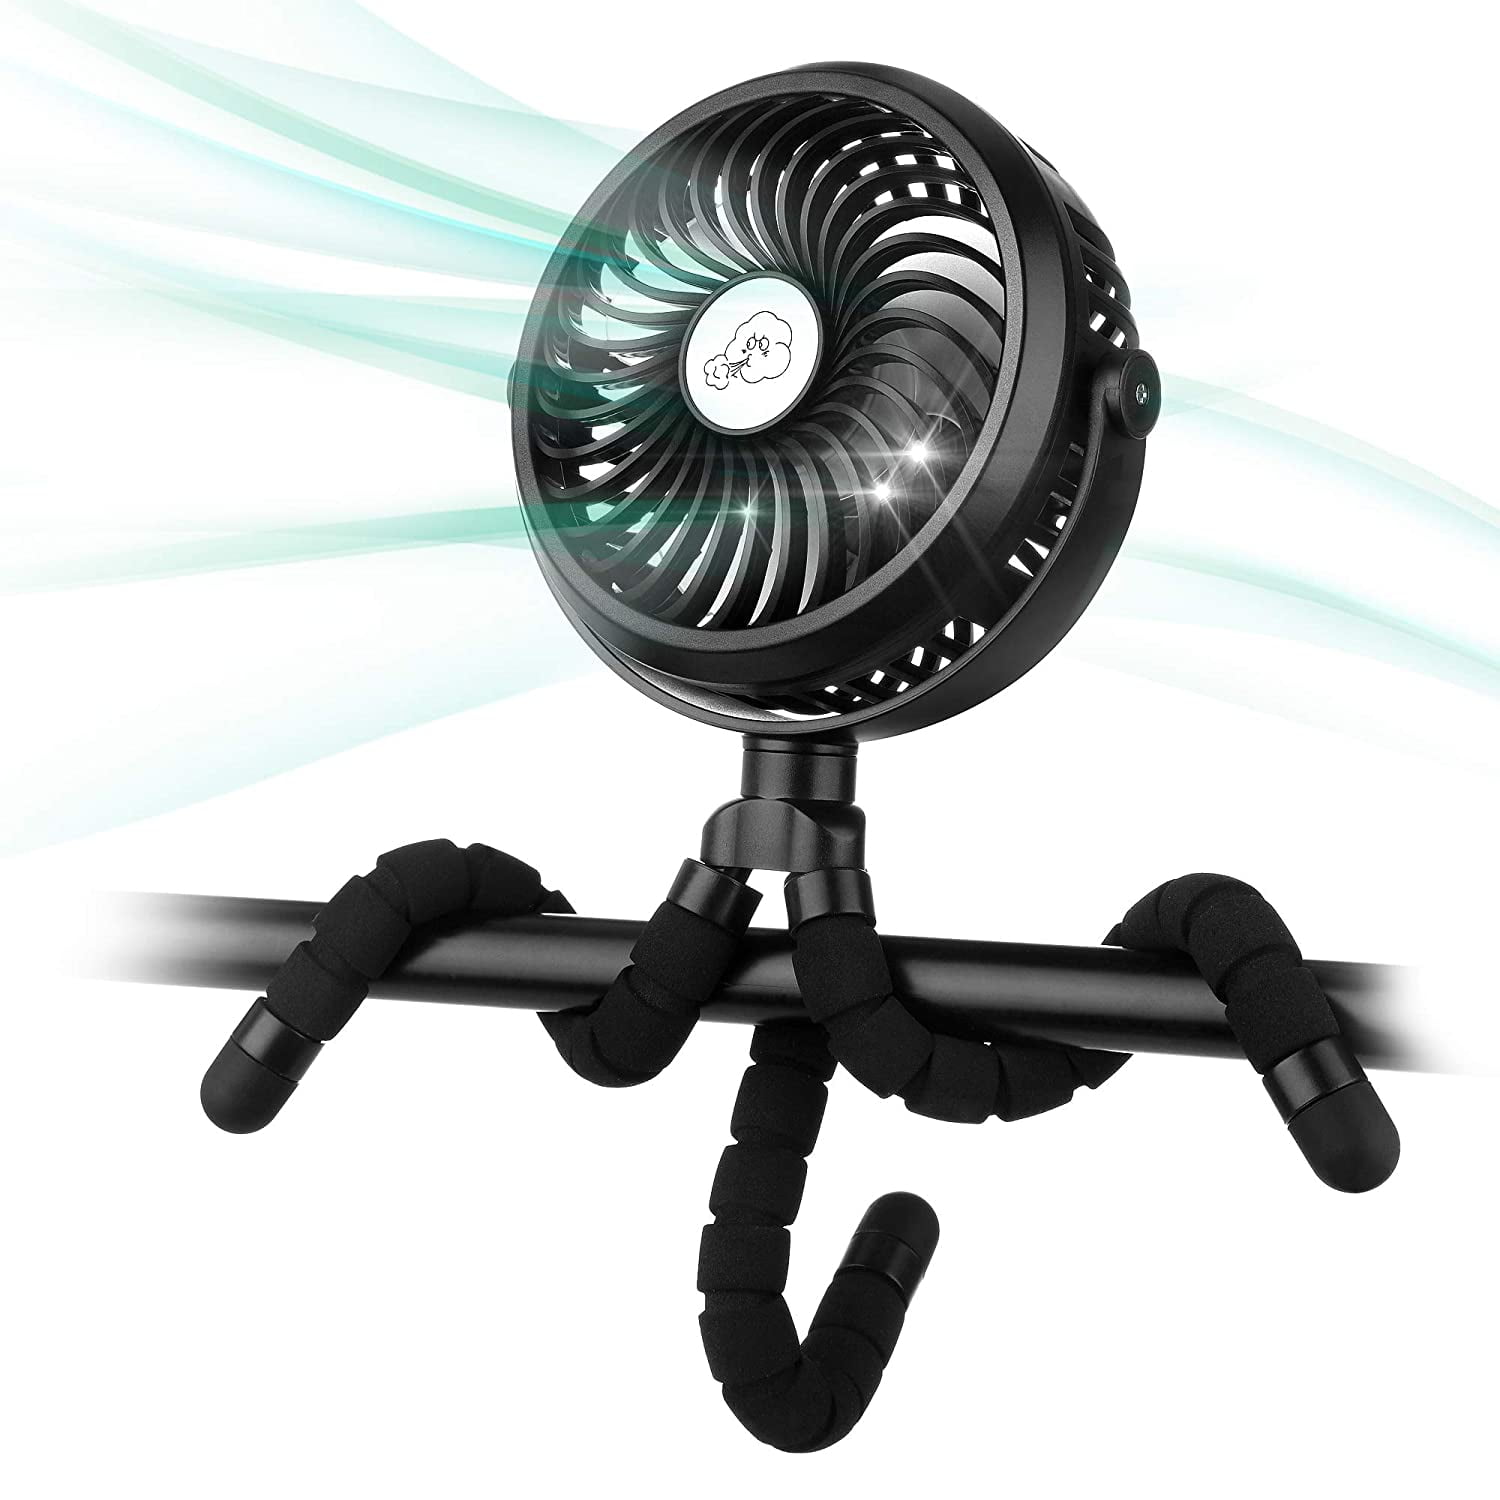 3 Speed Handheld 2000mAh Rechargeable USB Fan Mini Persoanl Air Circulator Fan with Flexible Tripod for Baby Stroller/Car Seat/Treadmill/Wheelchair/Camping White Portable Stroller Cooling Fan Battery Operated